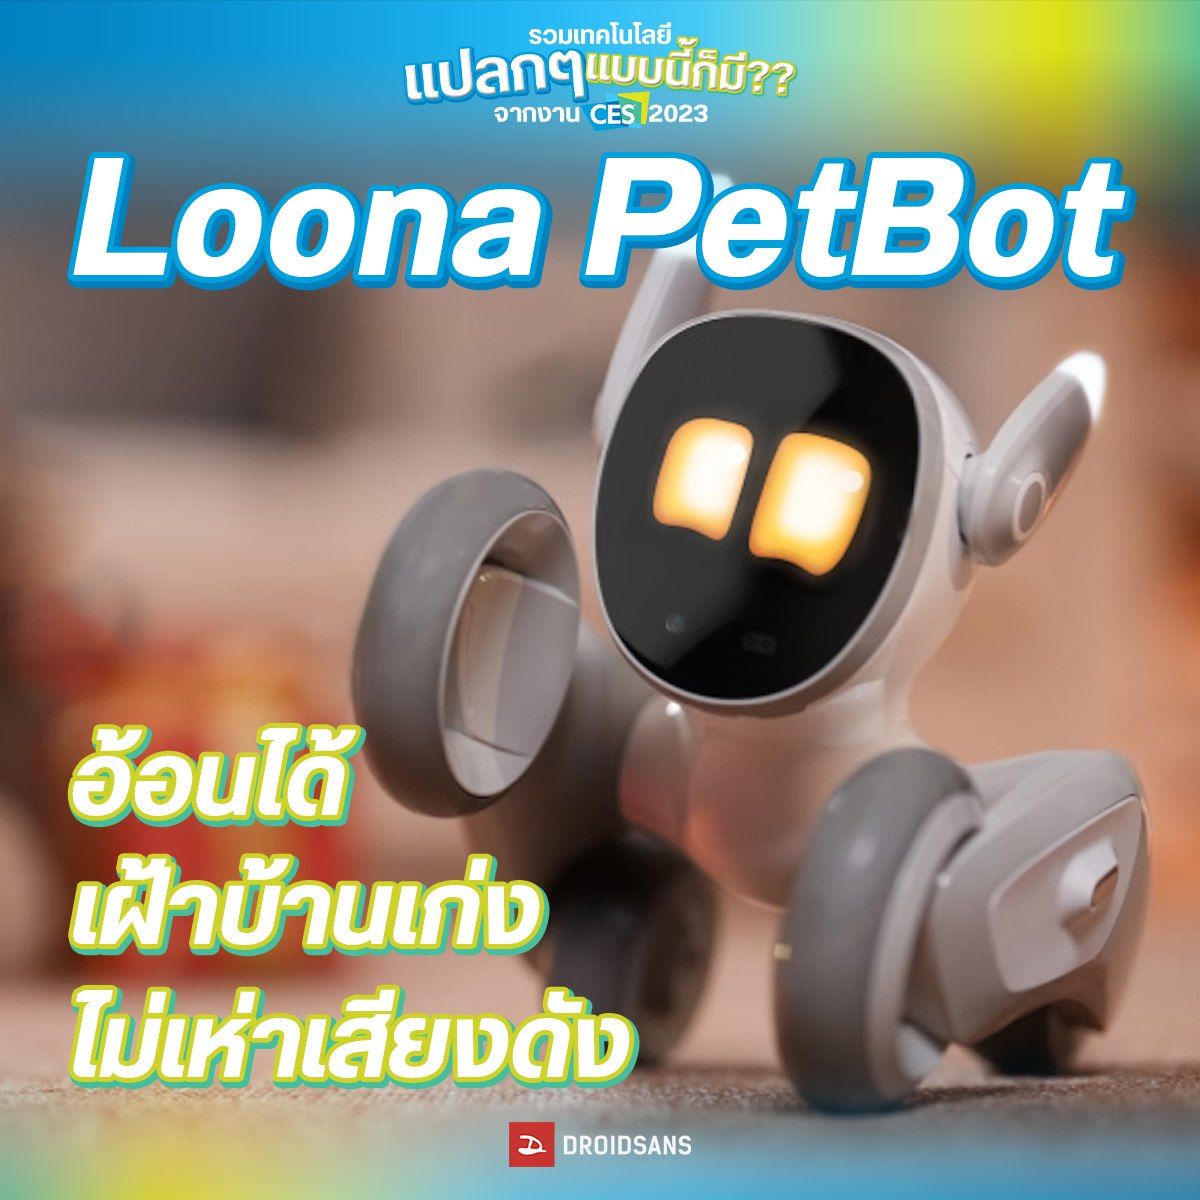 Loona PetBot